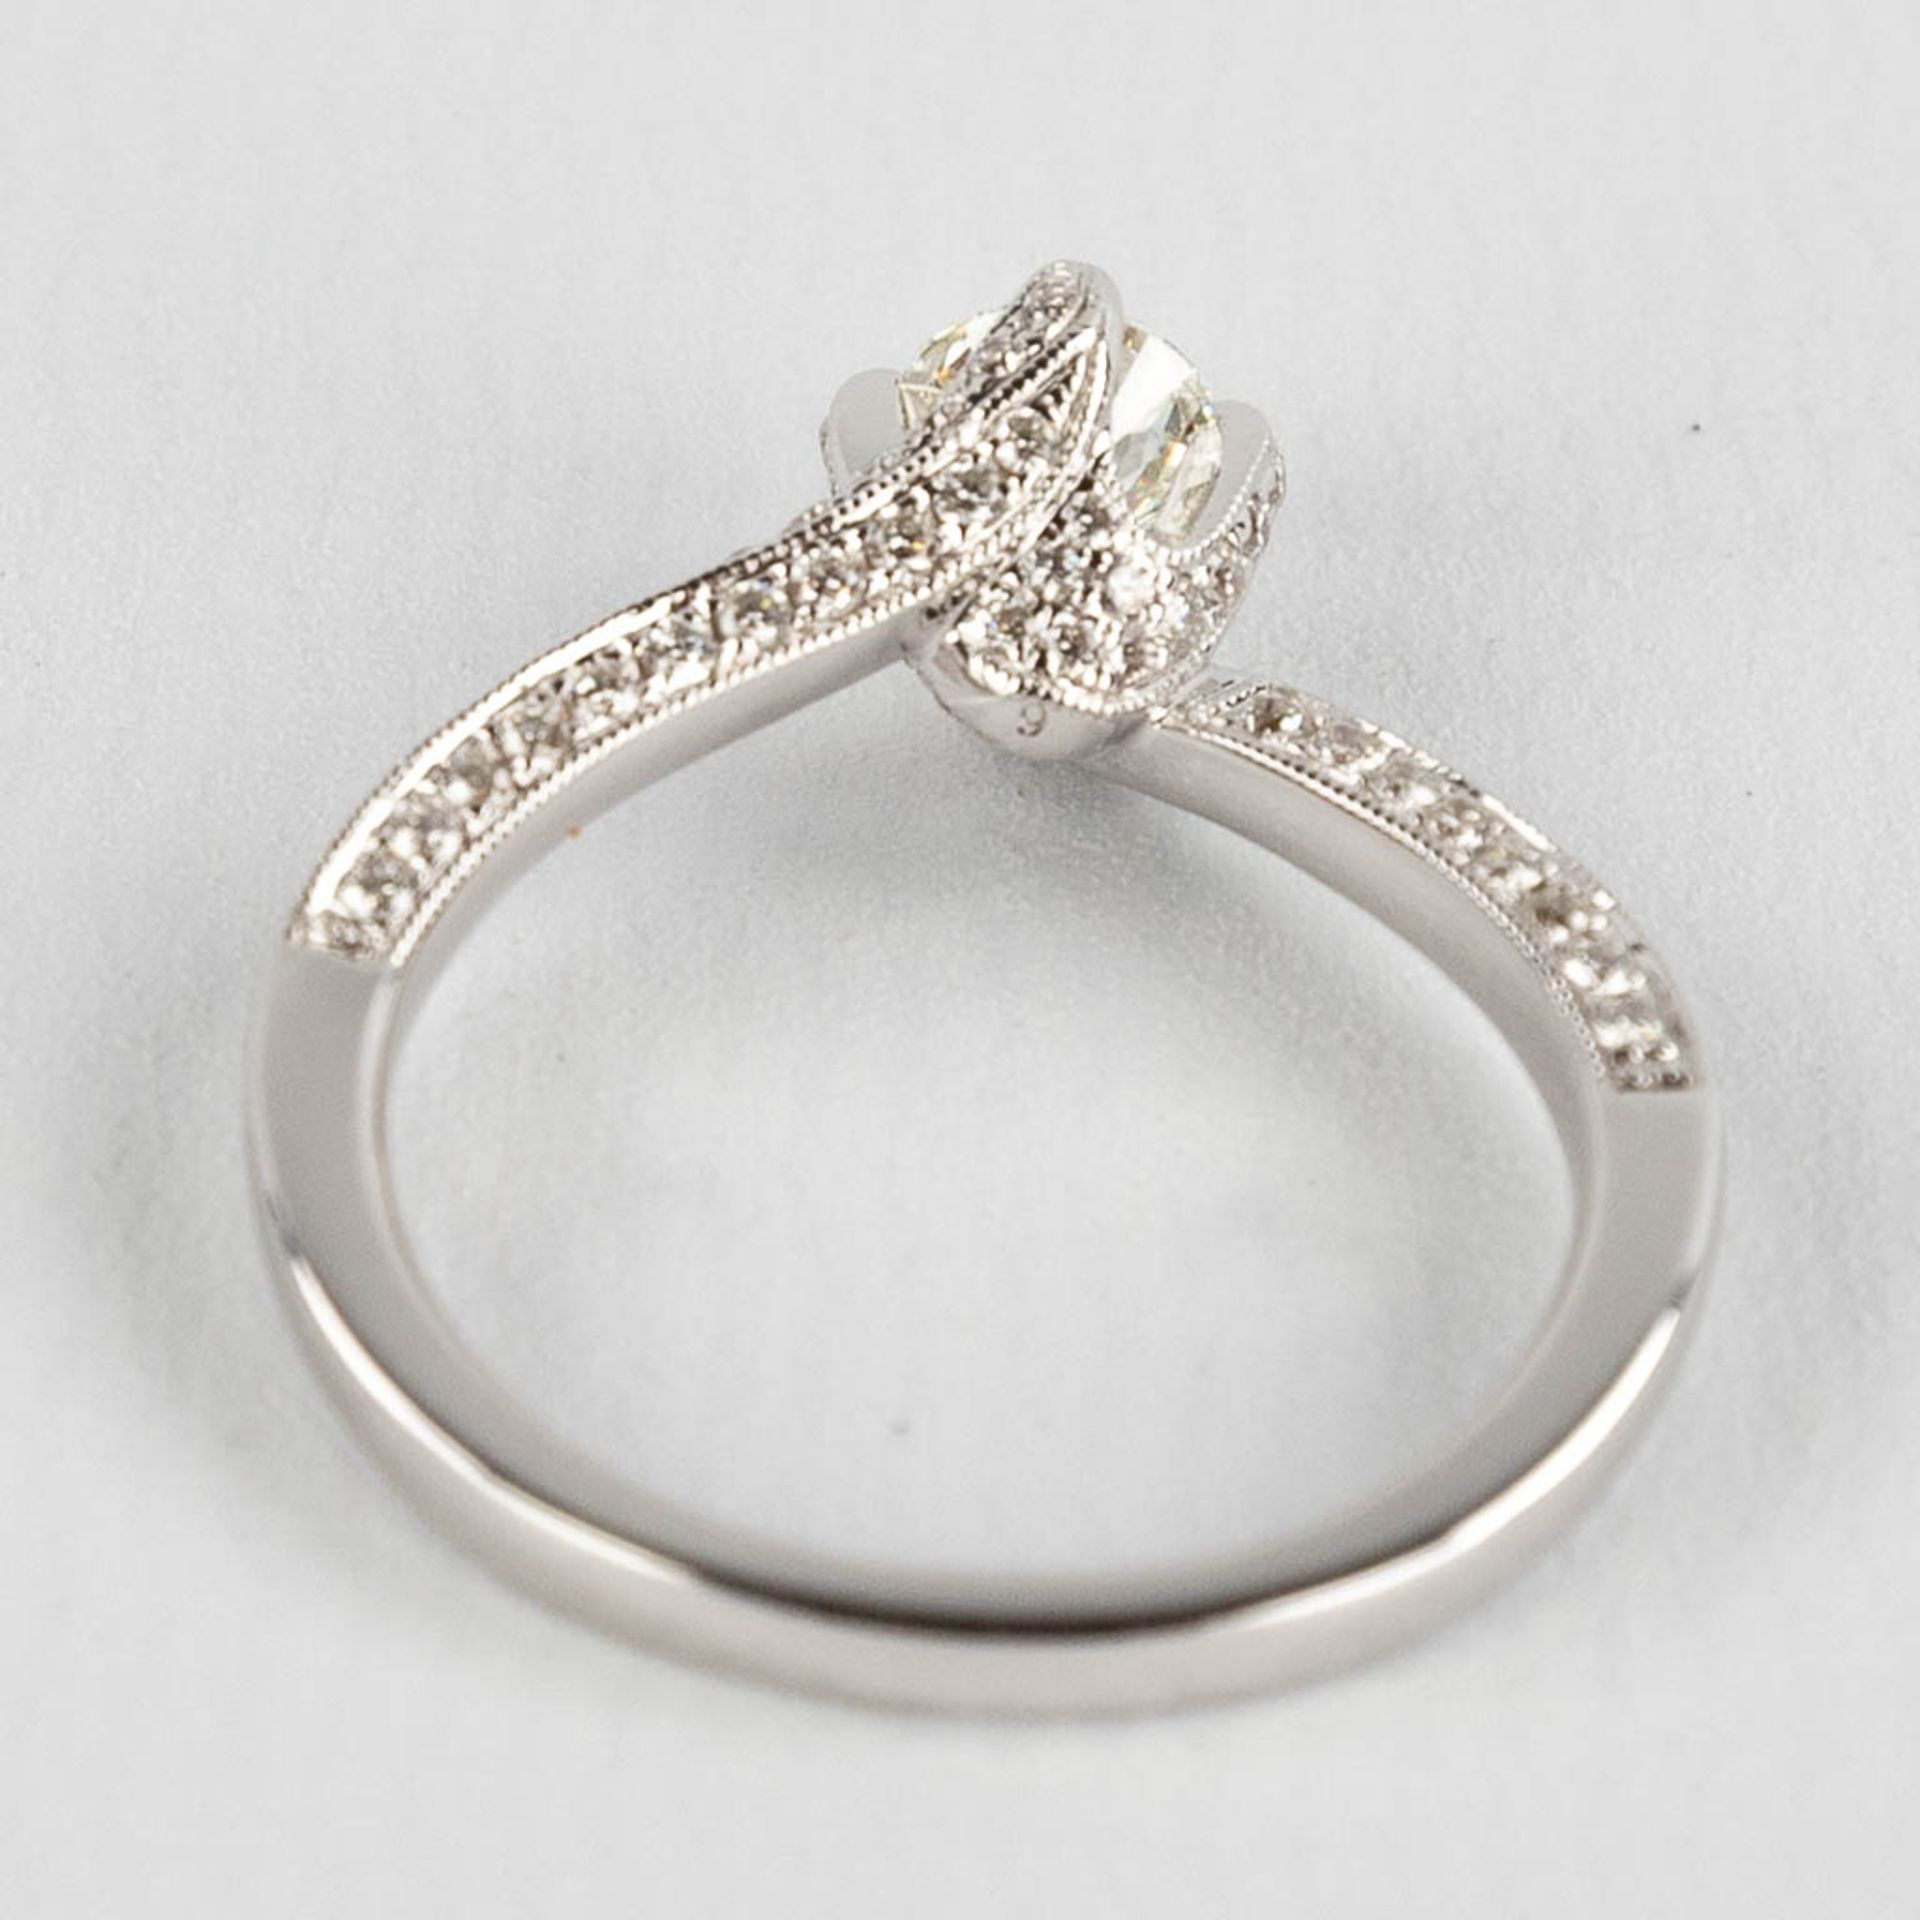 A ring, white gold with brilliant cut diamonds, central stone approximately 0,5ct, total appr. 0,53c - Image 5 of 10